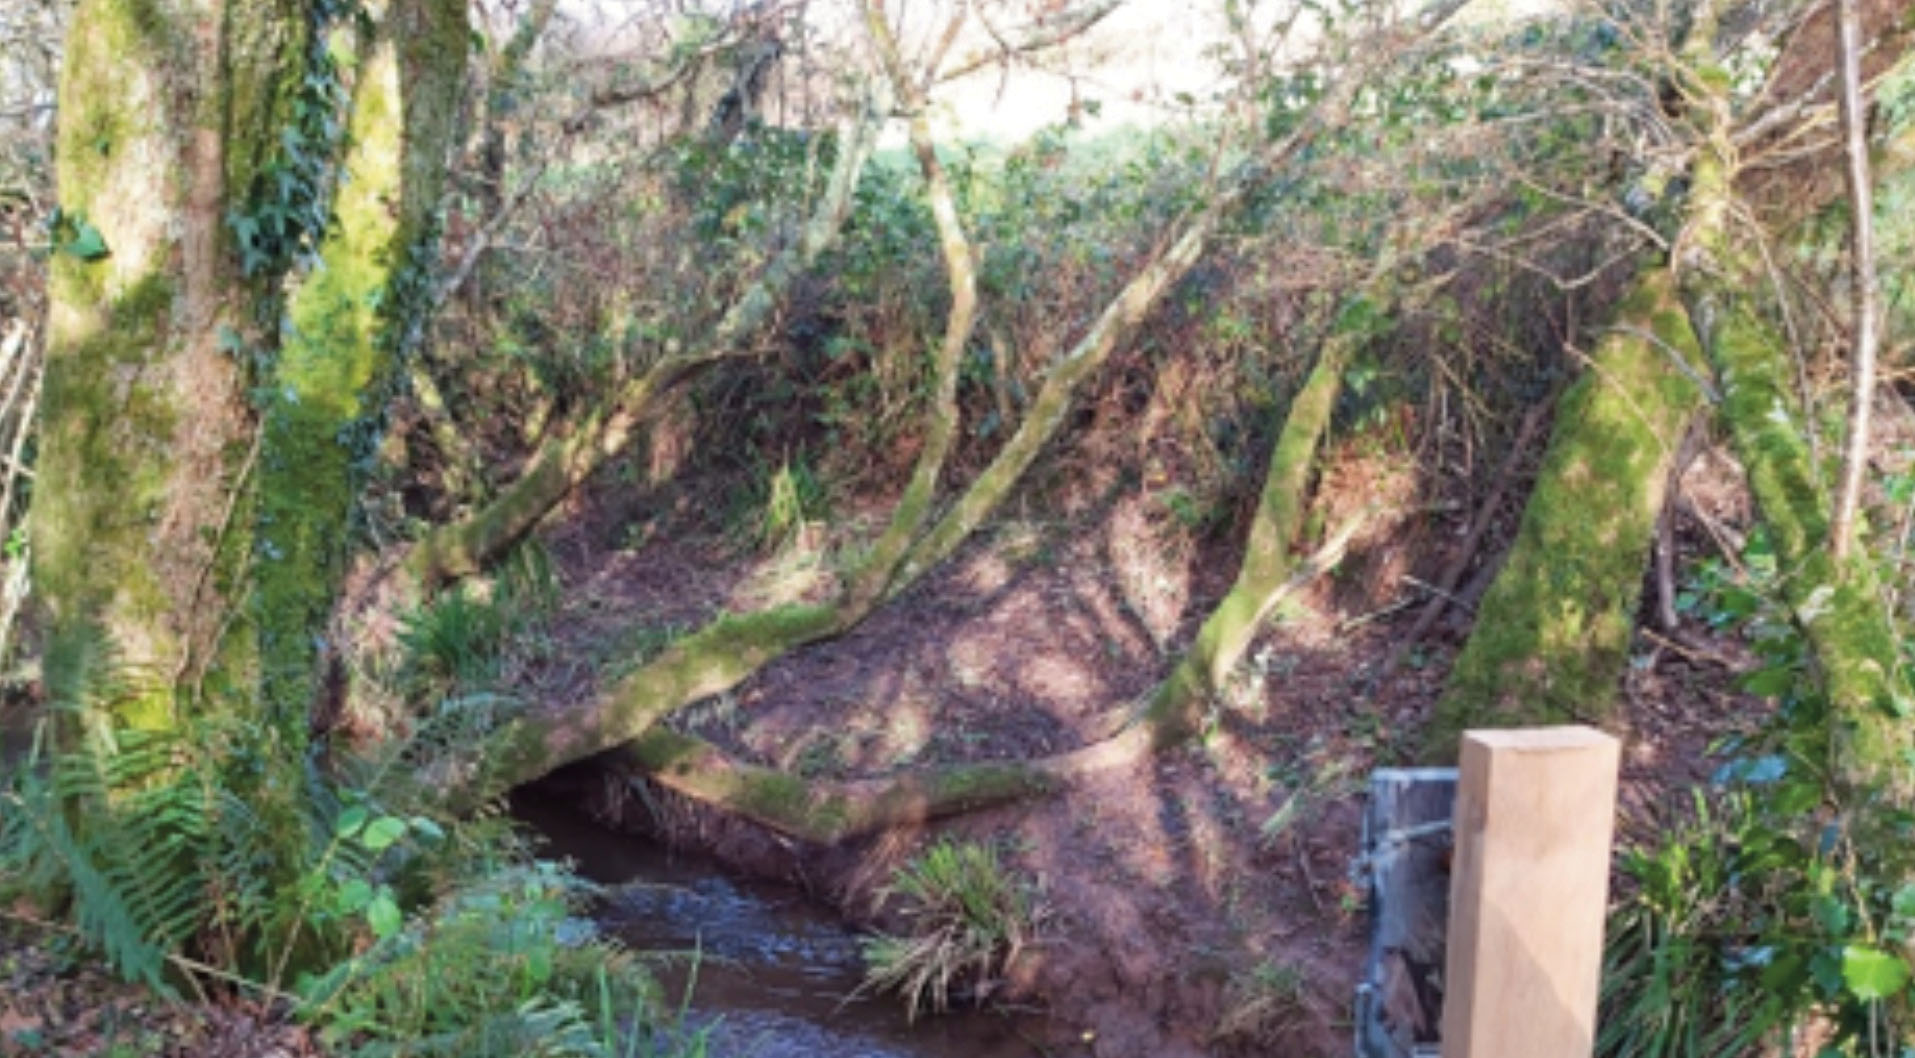 Camera trap for otters on the banks of a stream